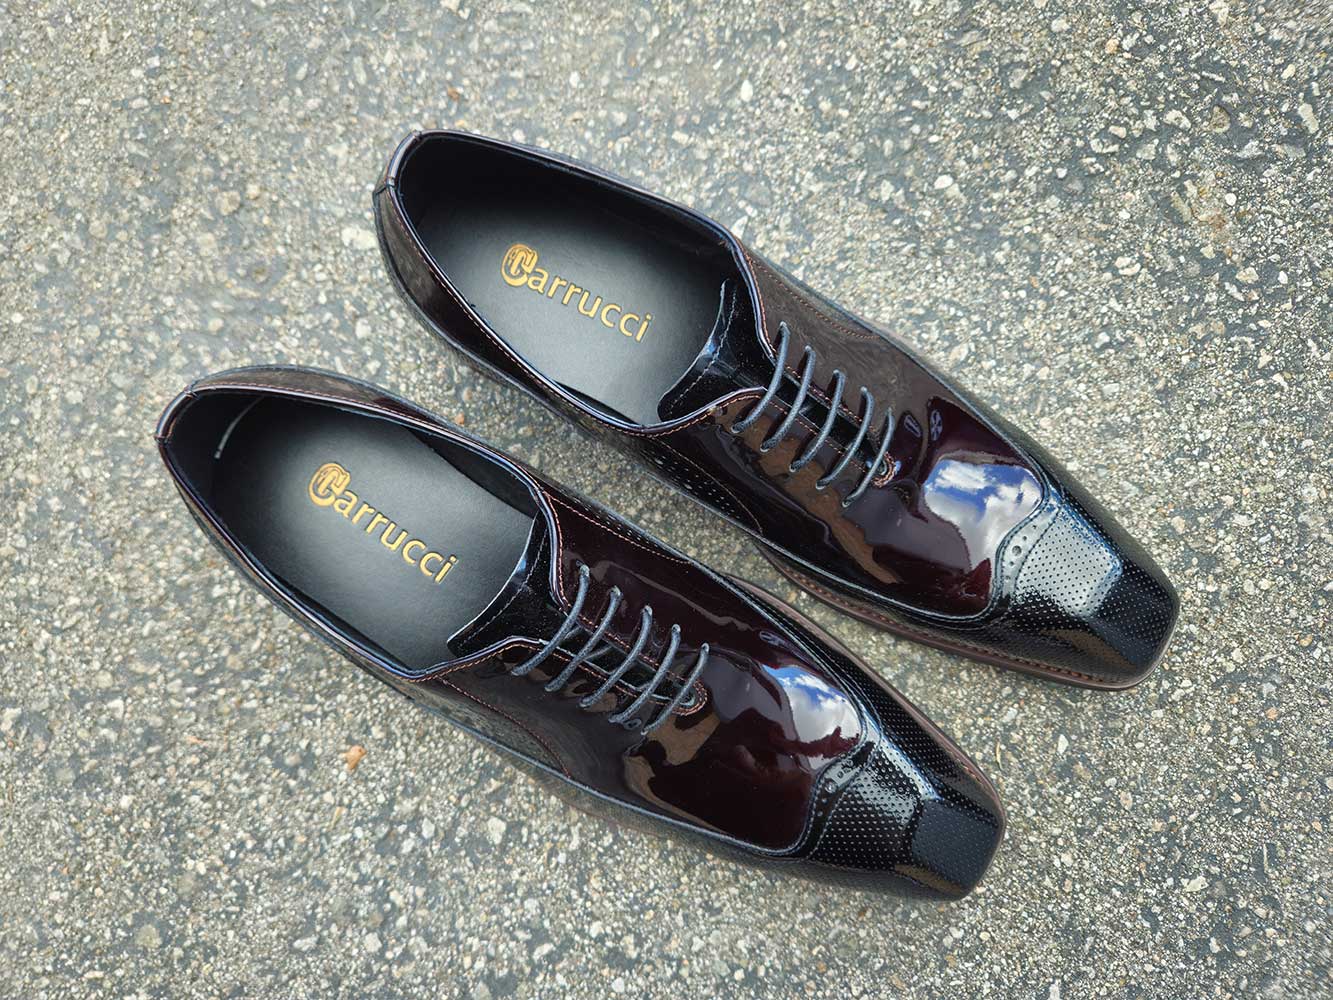 Modern Patent Leather Oxford